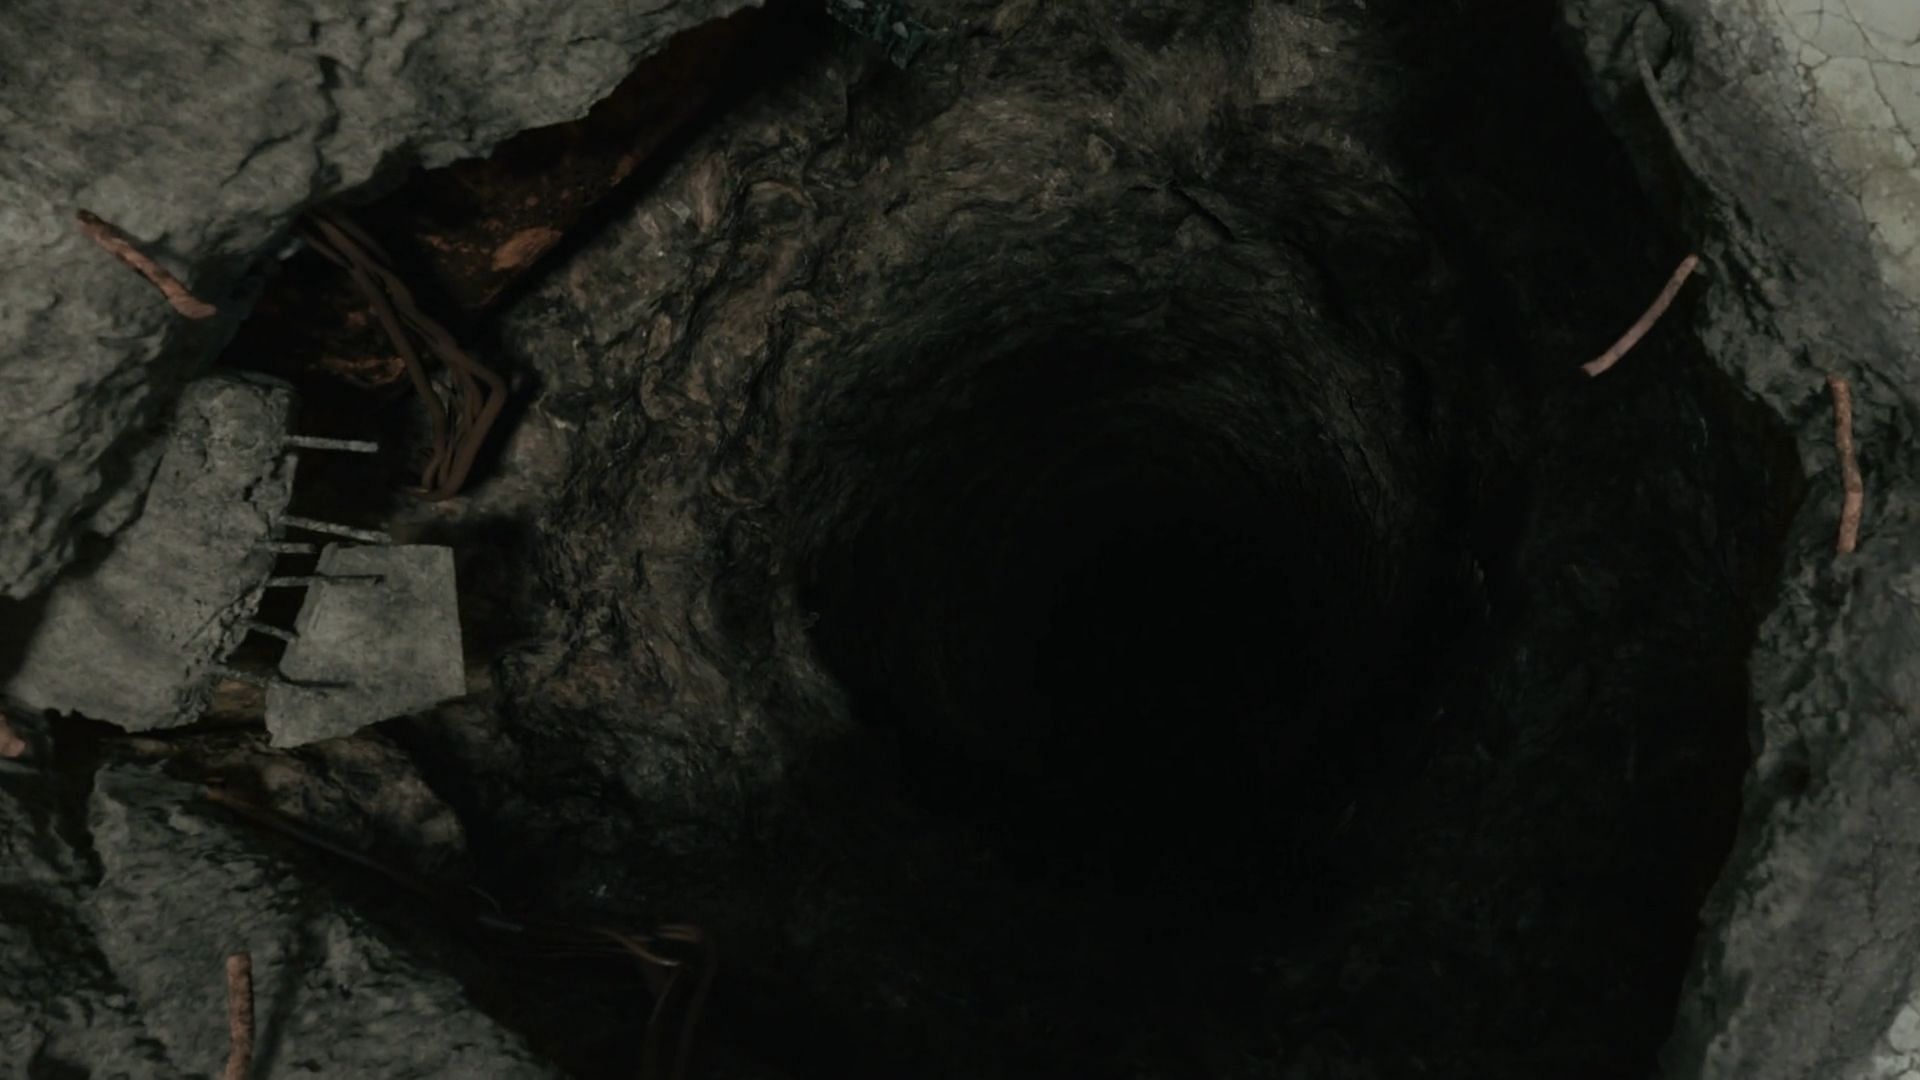 The sinkhole at Bend-33, as seen in Evil season 4 episode 1 (Image via Paramount+)